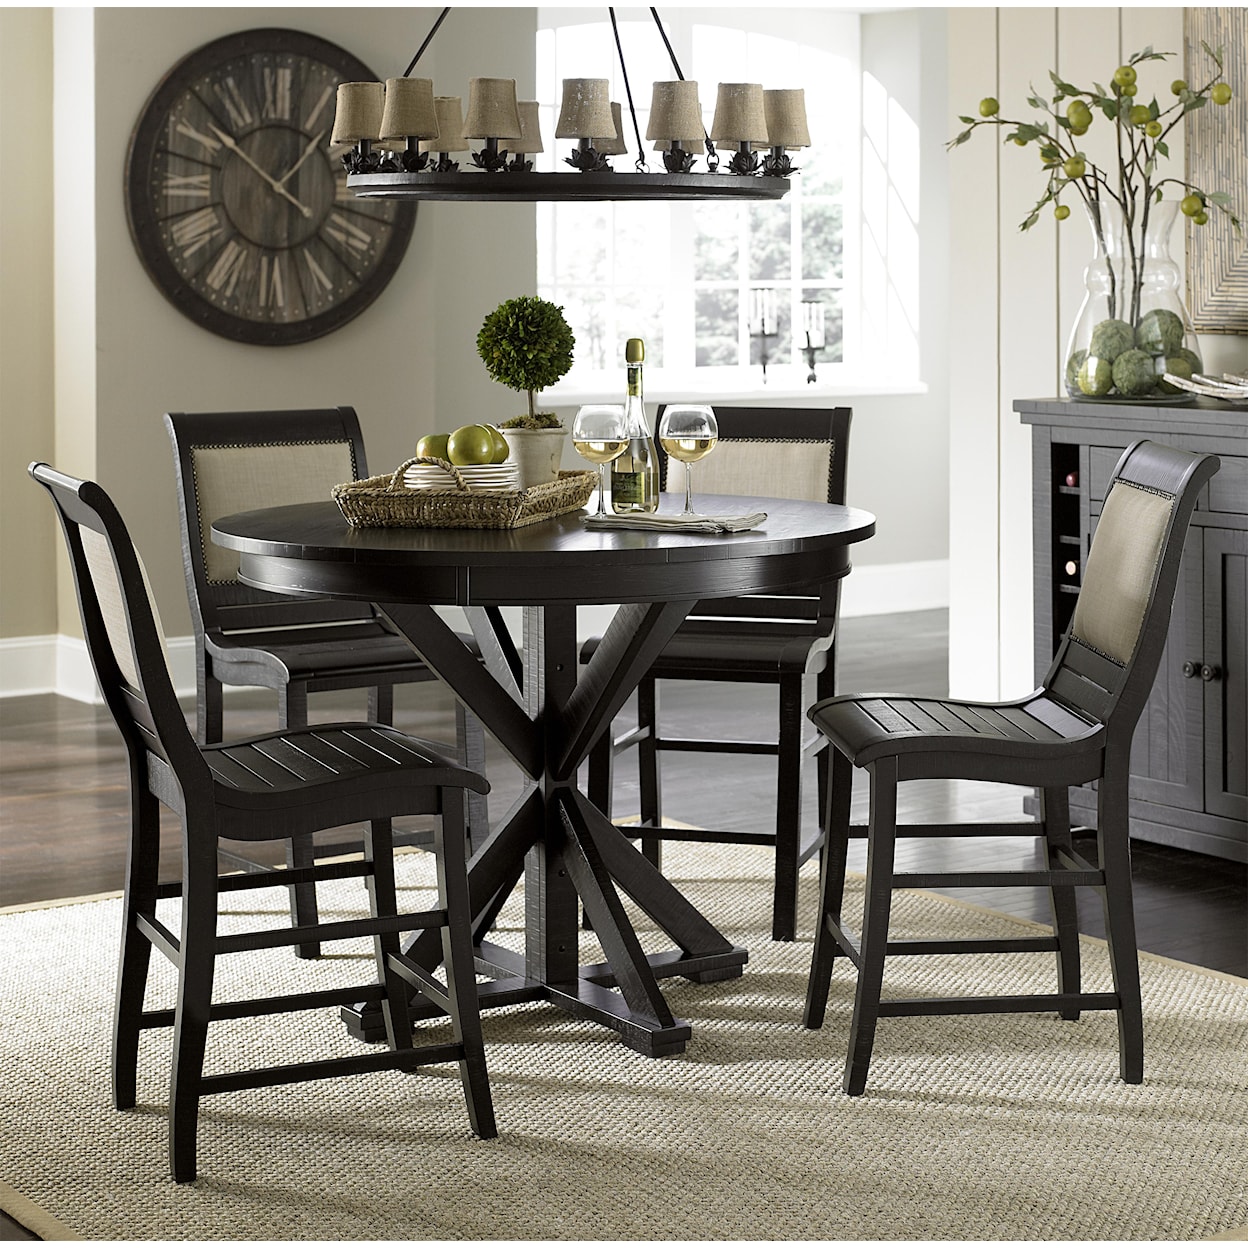 Carolina Chairs Willow Dining 5-Piece Round Counter Height Table Set